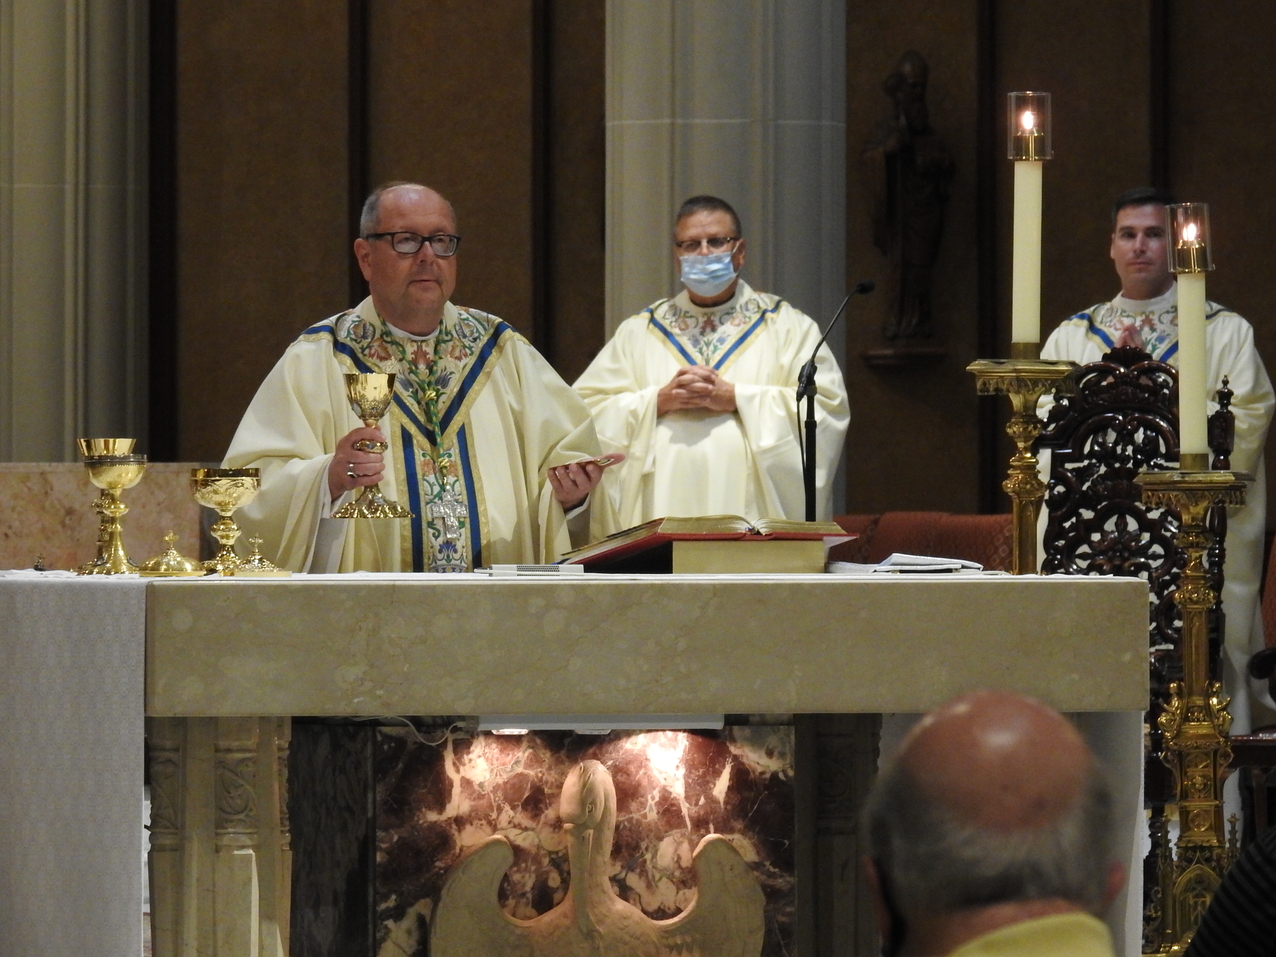 ‘Please pray for me’ newly appointed Bishop Malesic asks faithful in Diocese of Cleveland